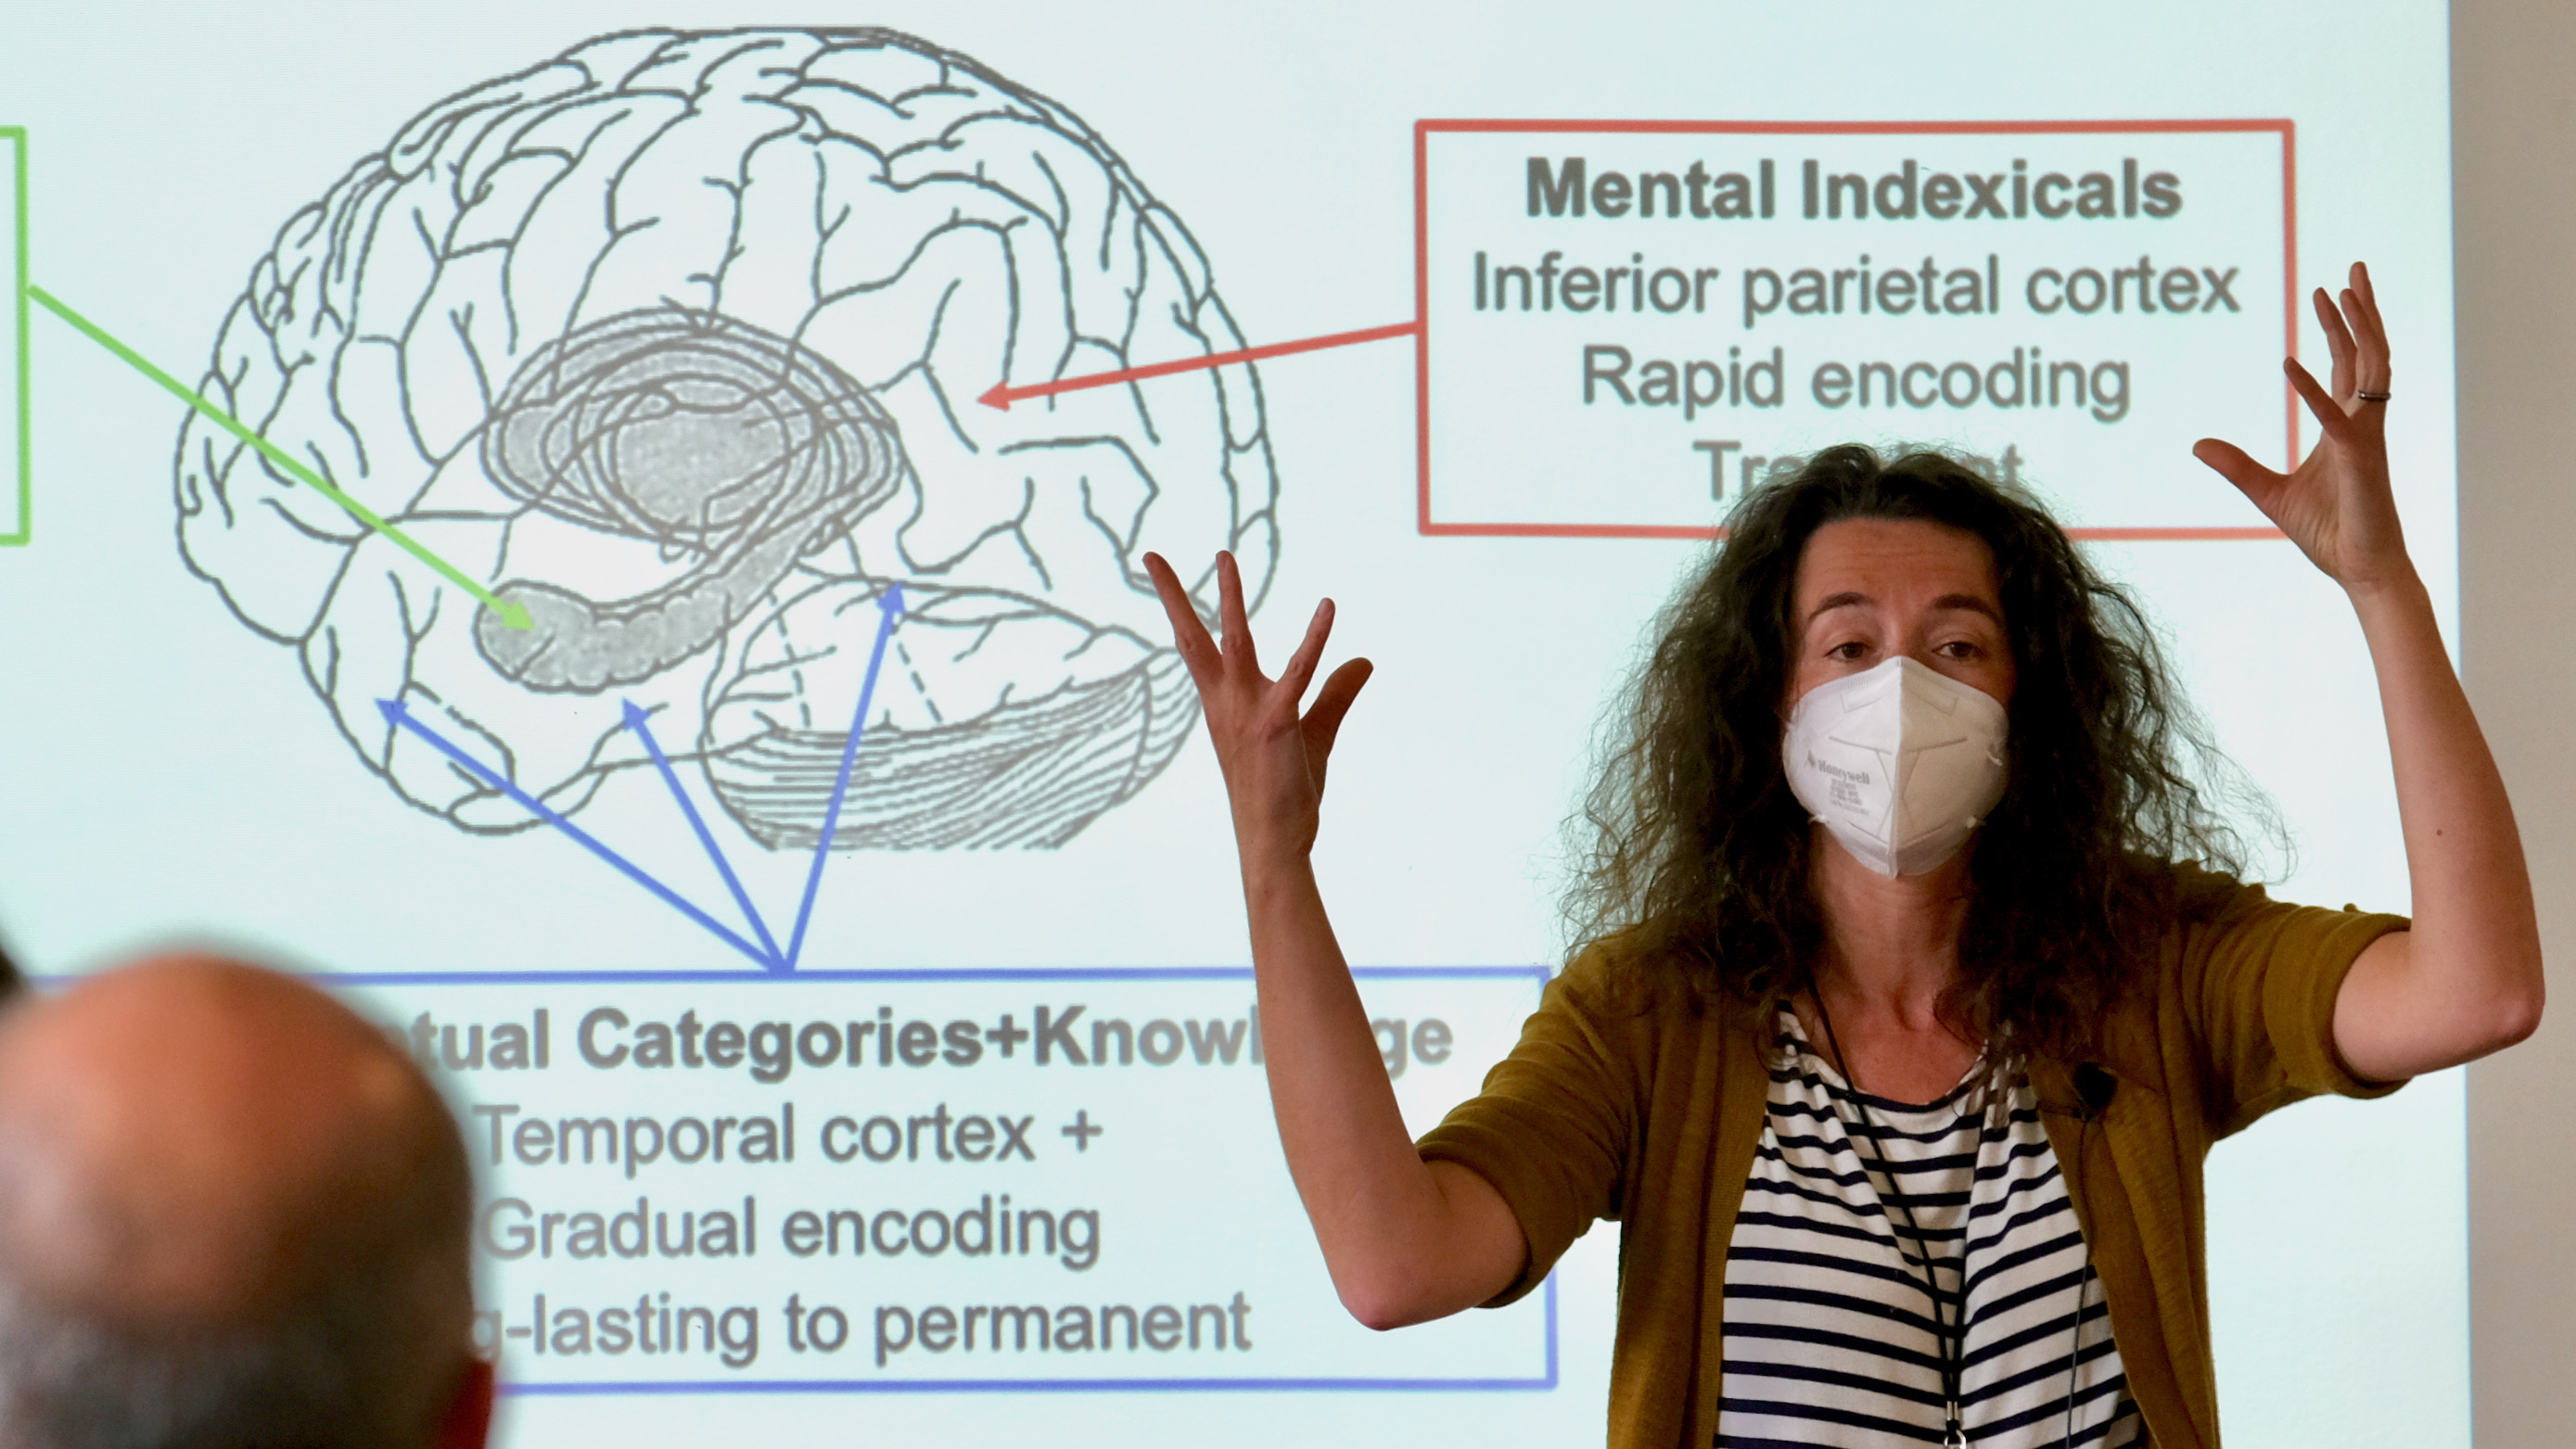 Ellen Lau, Professor of Neurolinguistics, gesticulating in front of a screen showing an image of the brain, with the phrase "Mental Indexicals" in a box, pointing at the hippocampus.